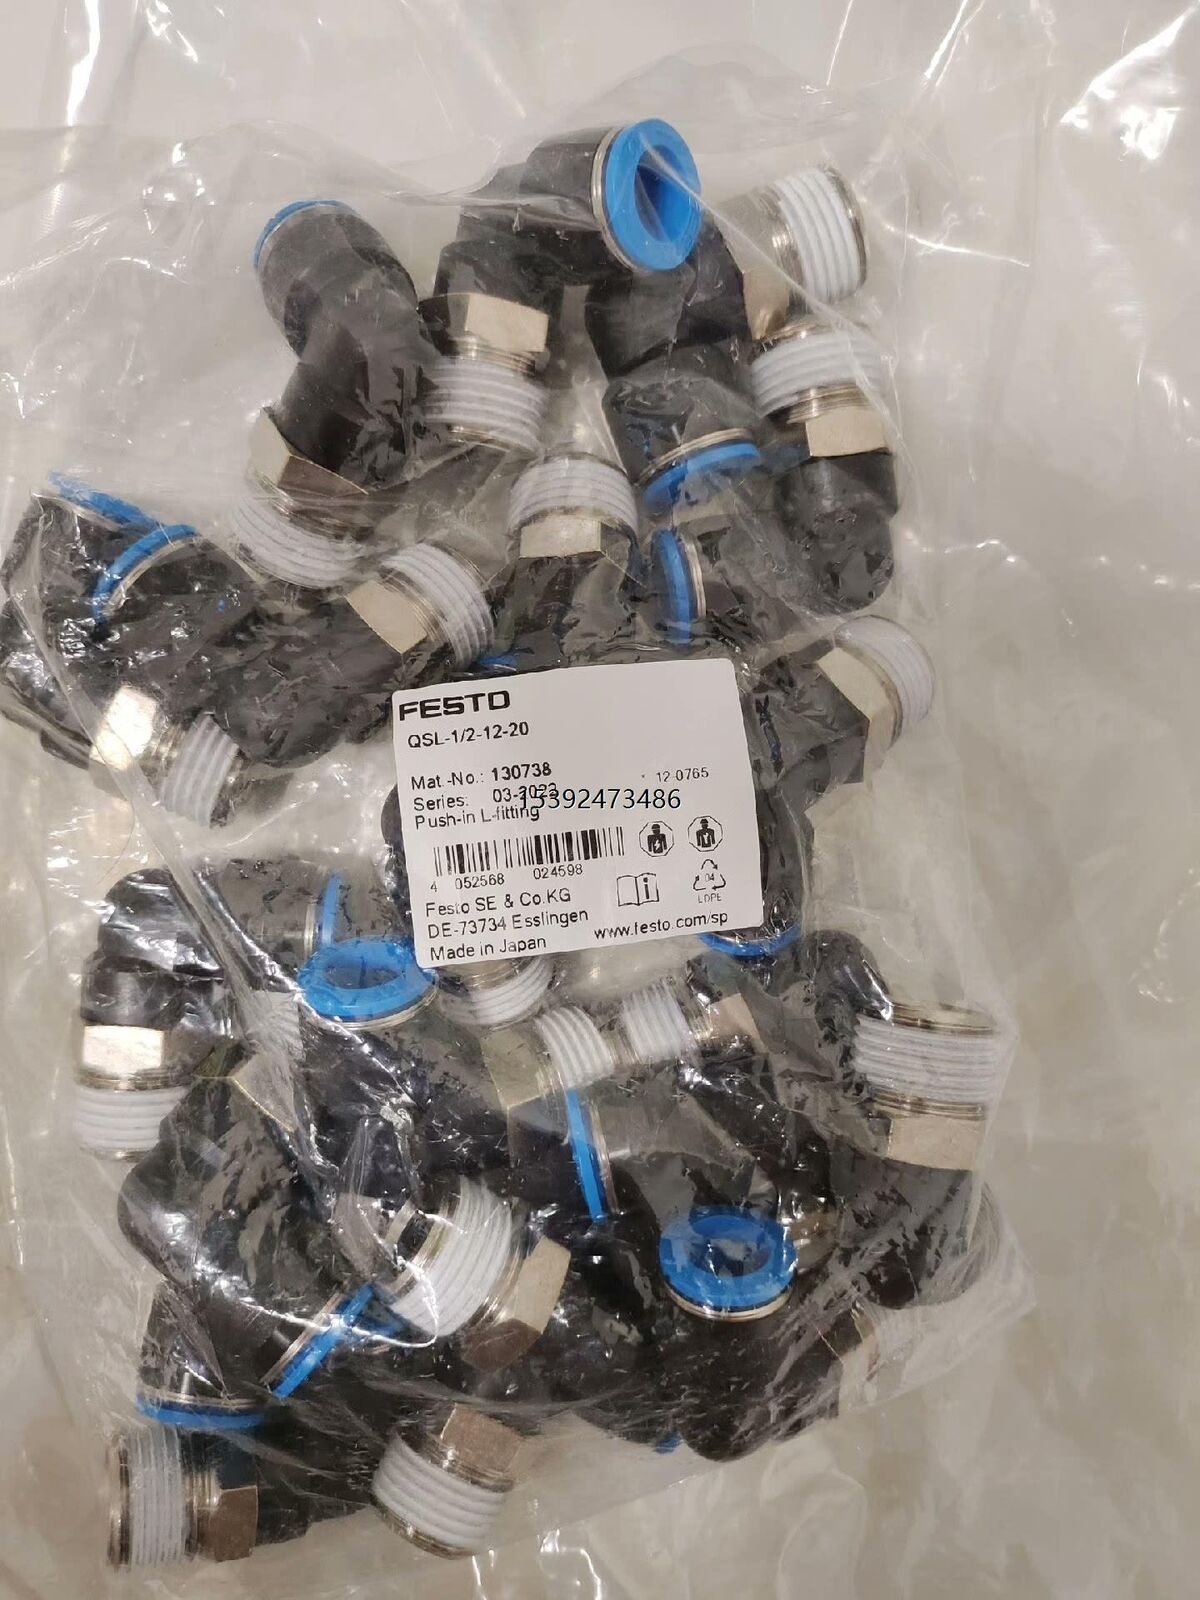 10PCS NEW FIT FOR FESTO QSL-1/2-12 153054 Push-In Fittings